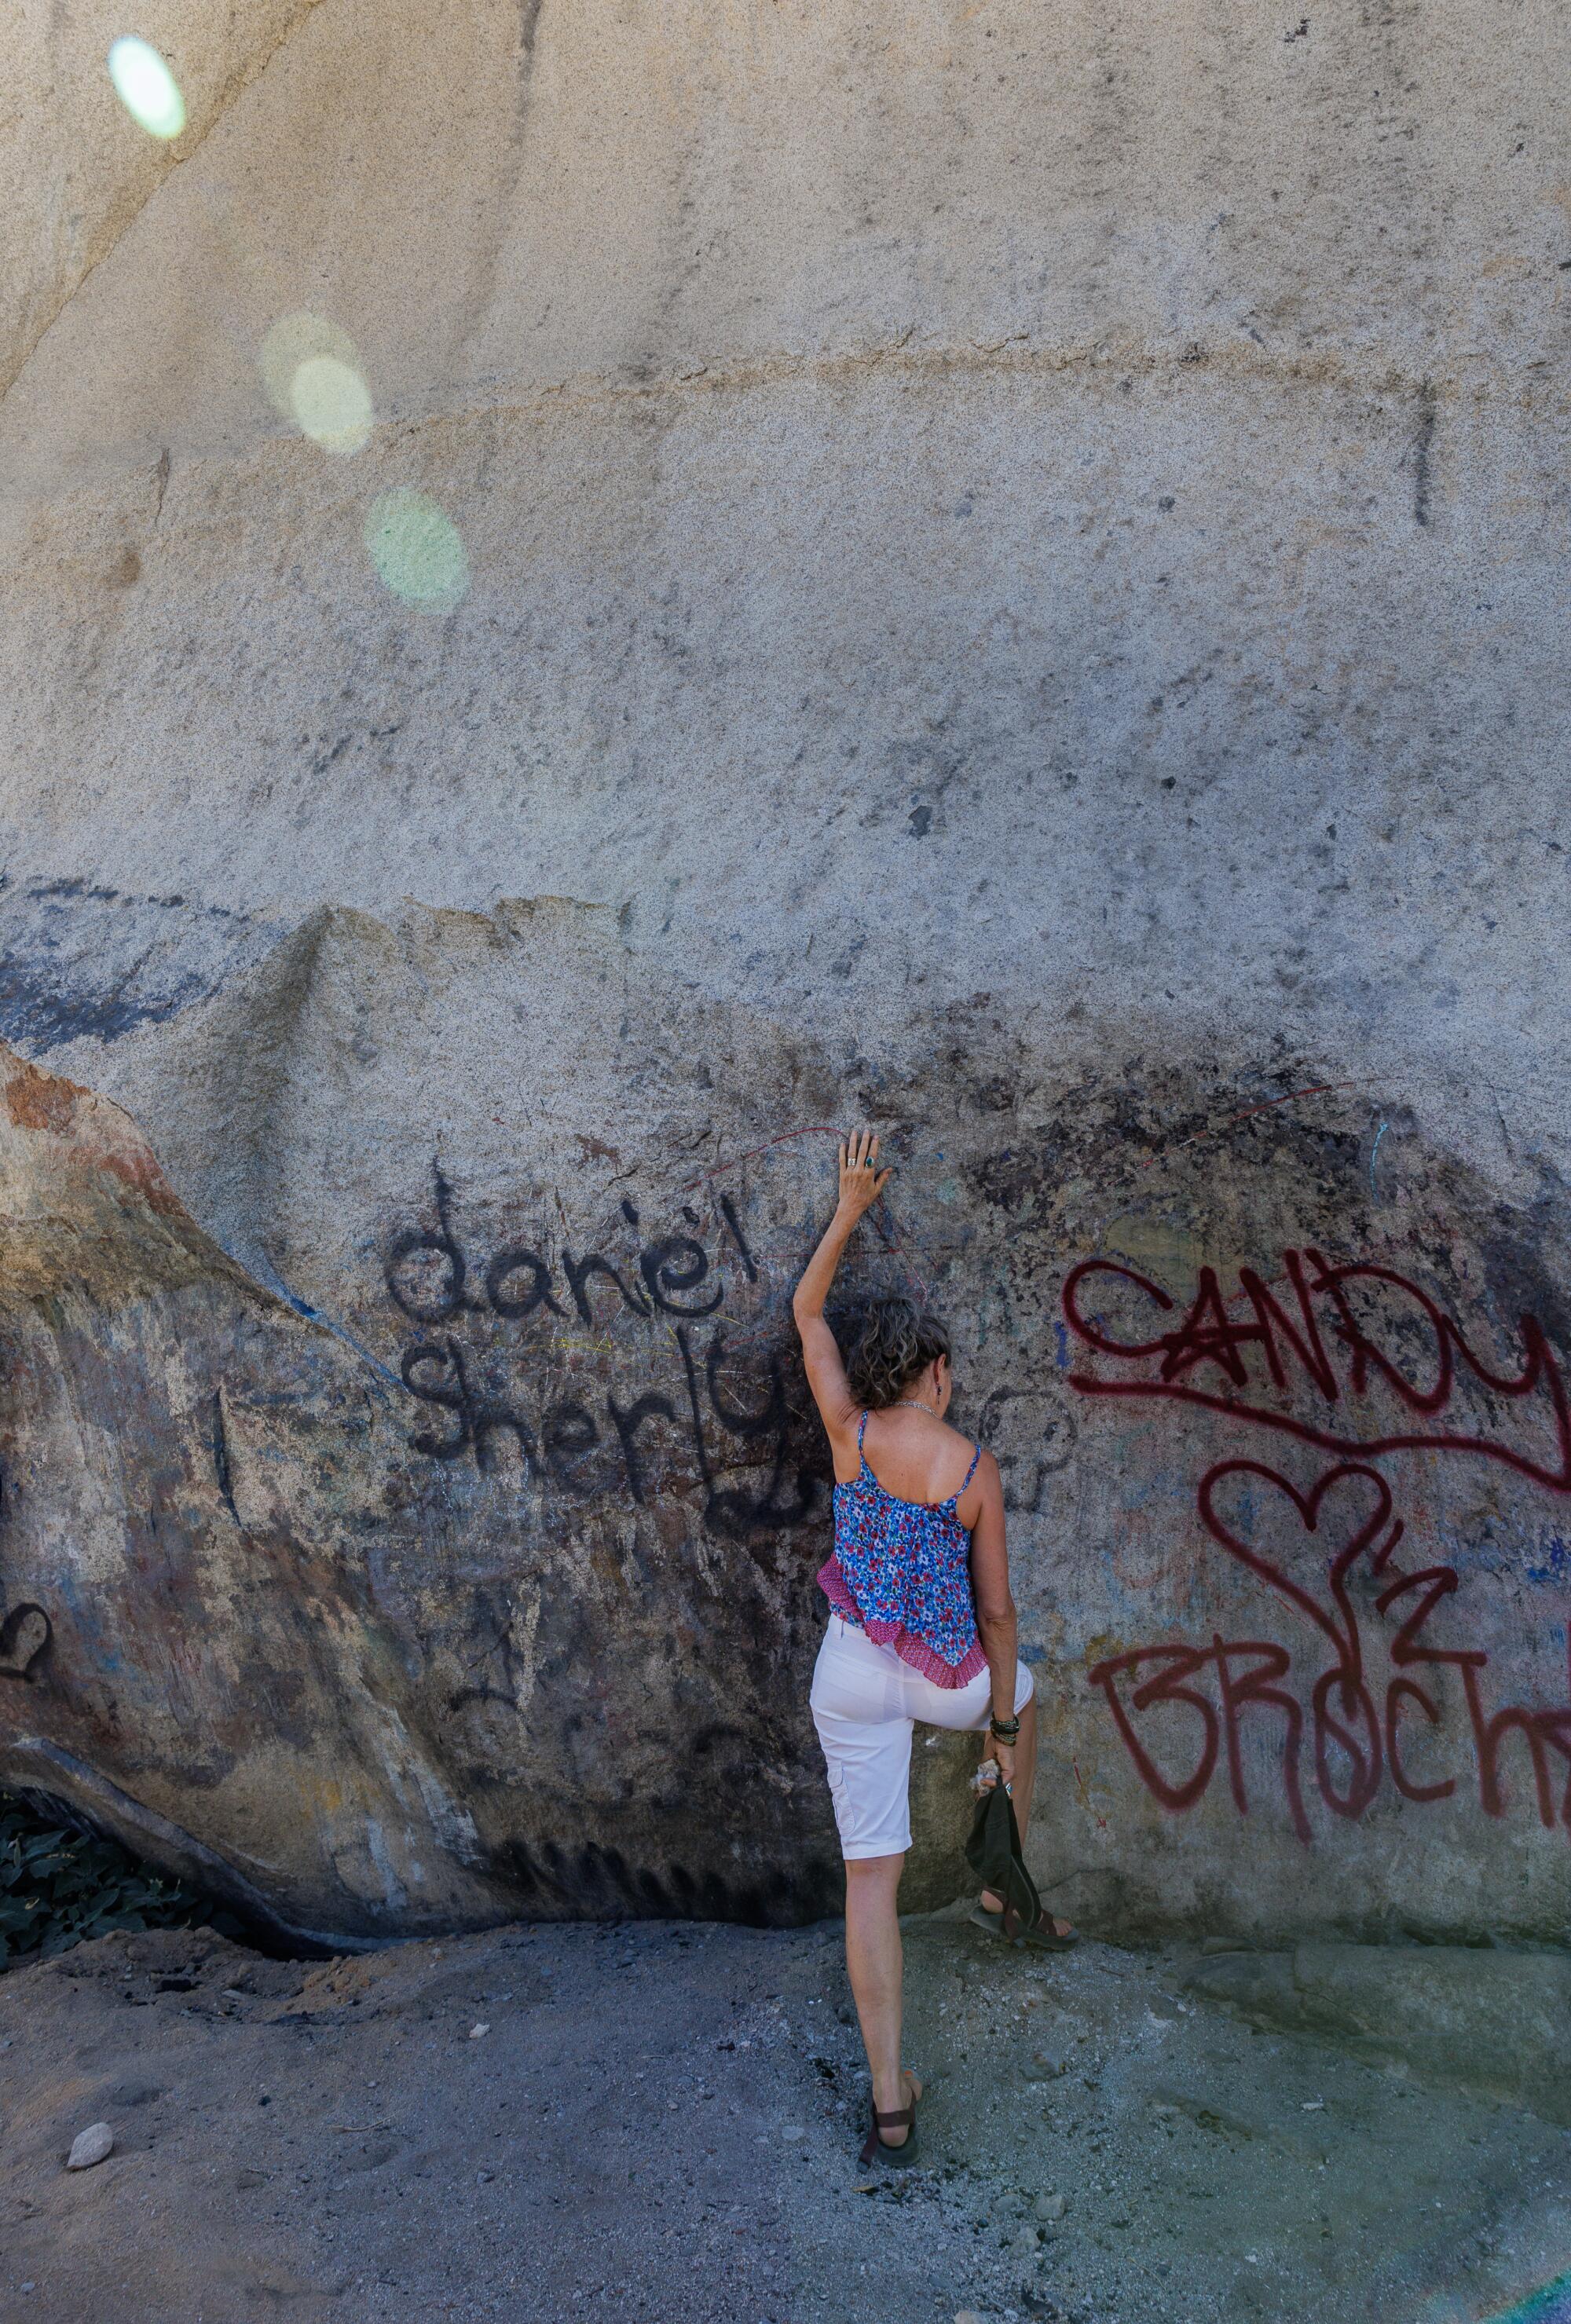 A woman stretches her hand over her head to place it on the surface of Giant Rock, which is scarred by graffiti. 